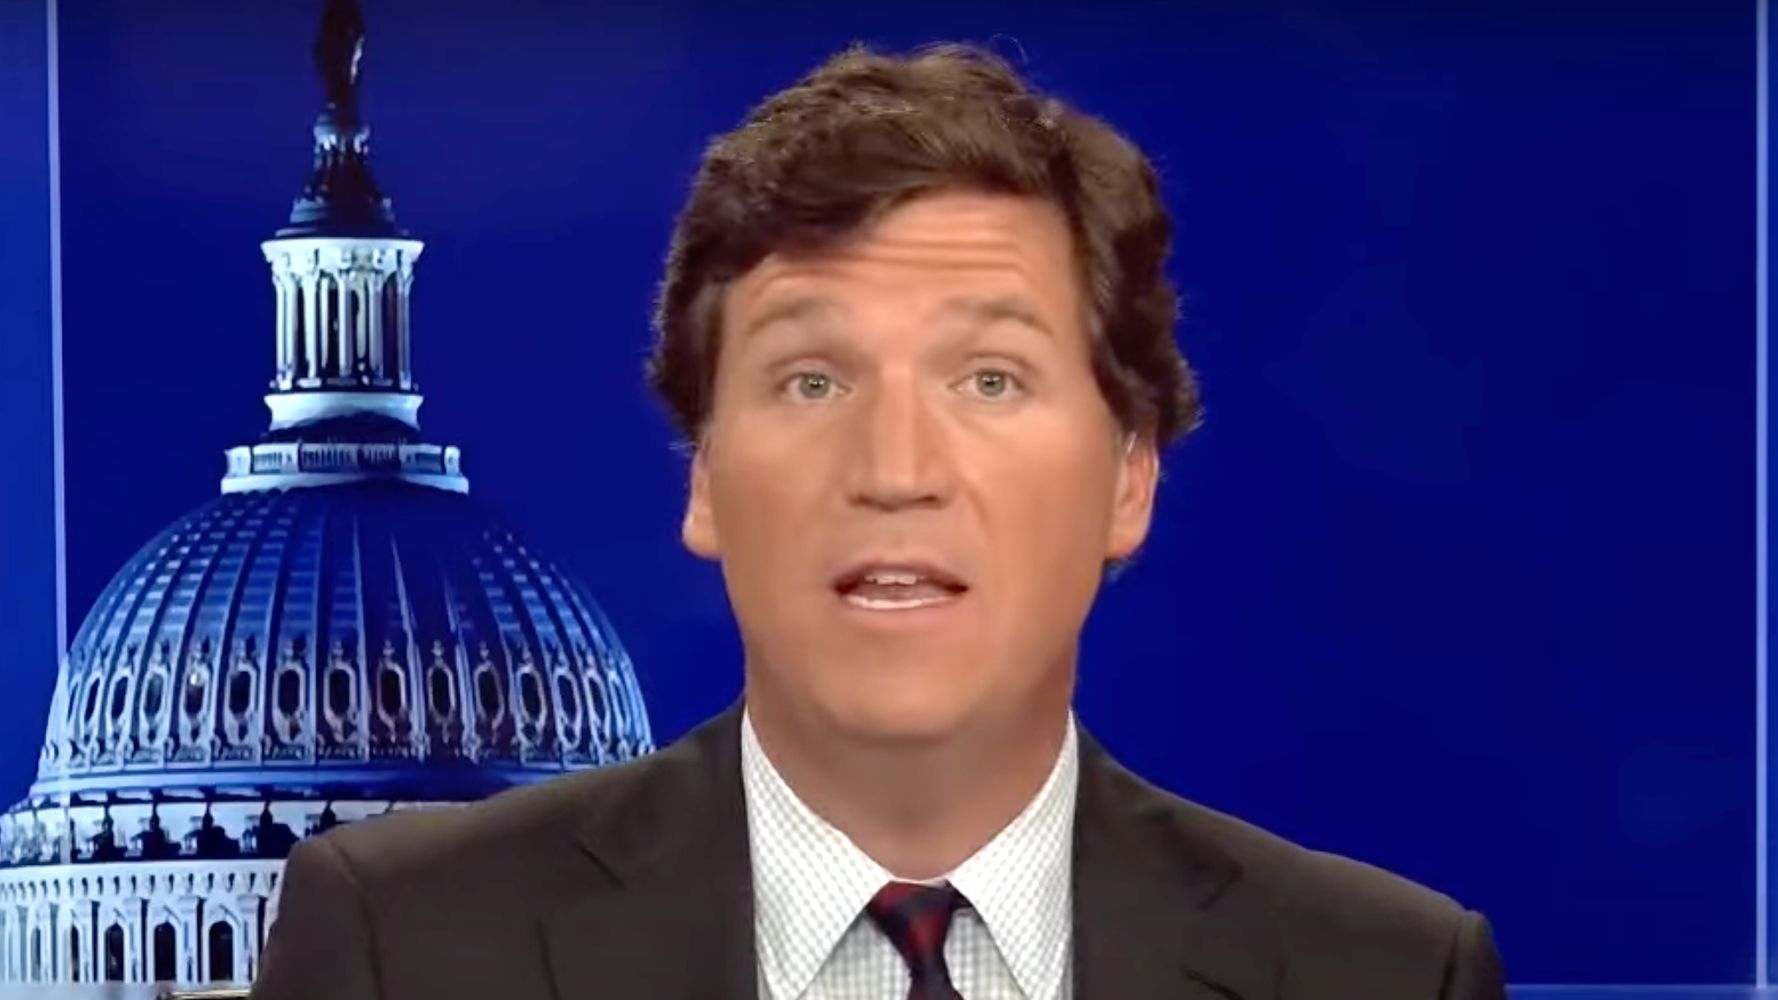 Tucker Carlson Goes Into 'Meltdown' Mode While Covering Derek Chauvin Conviction